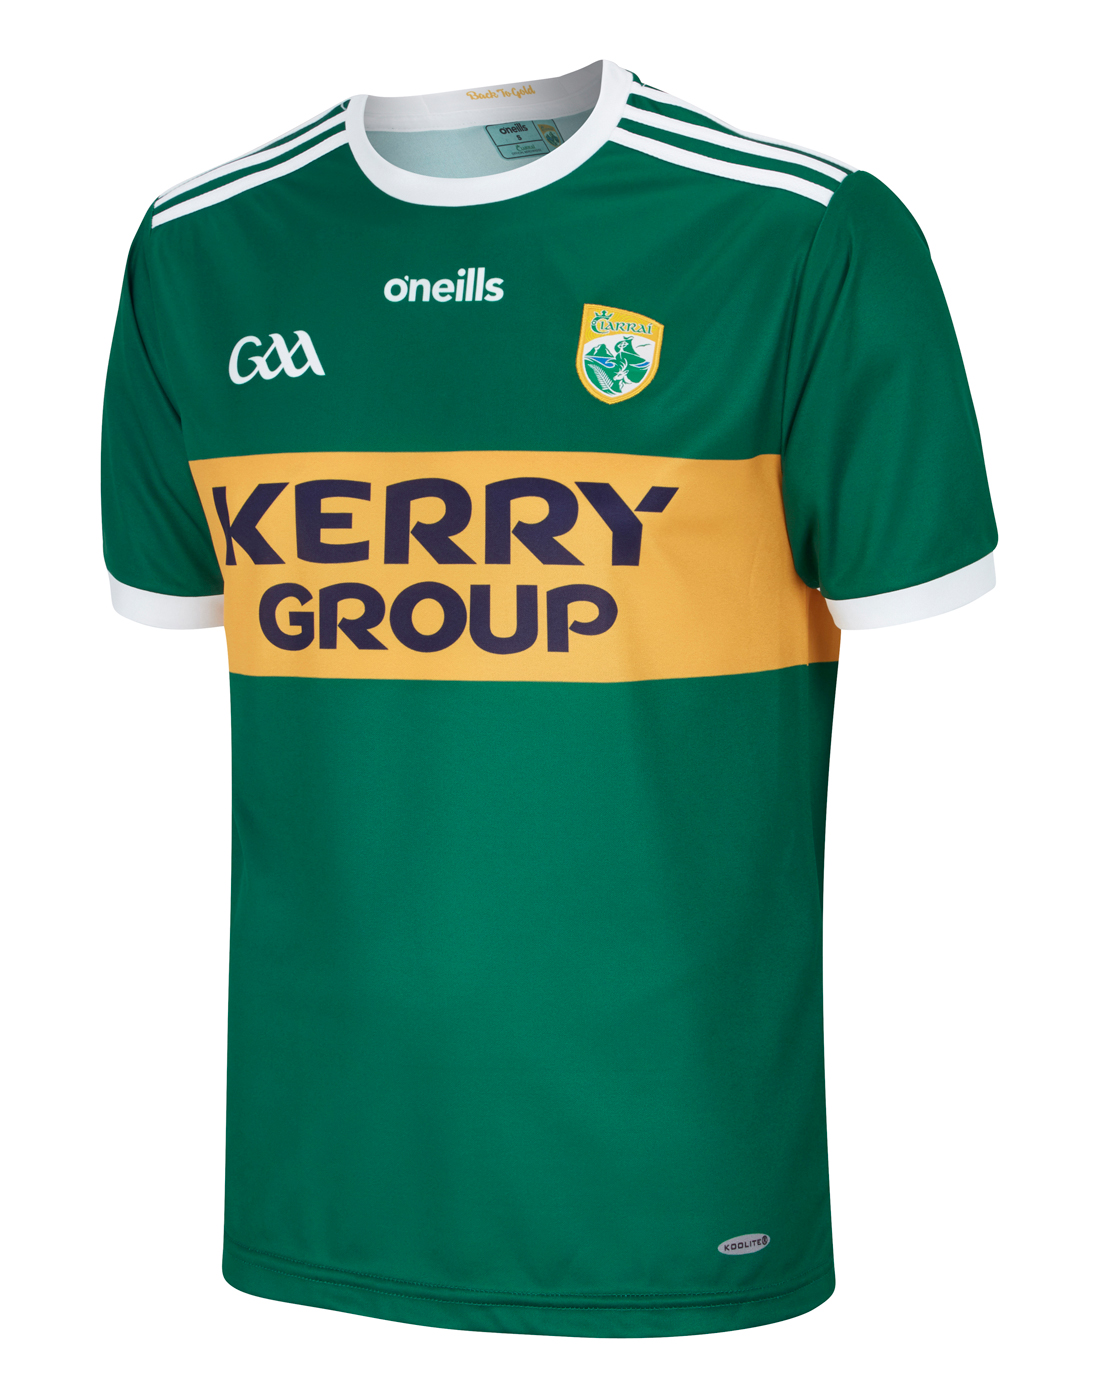 kerry adidas jersey for sale